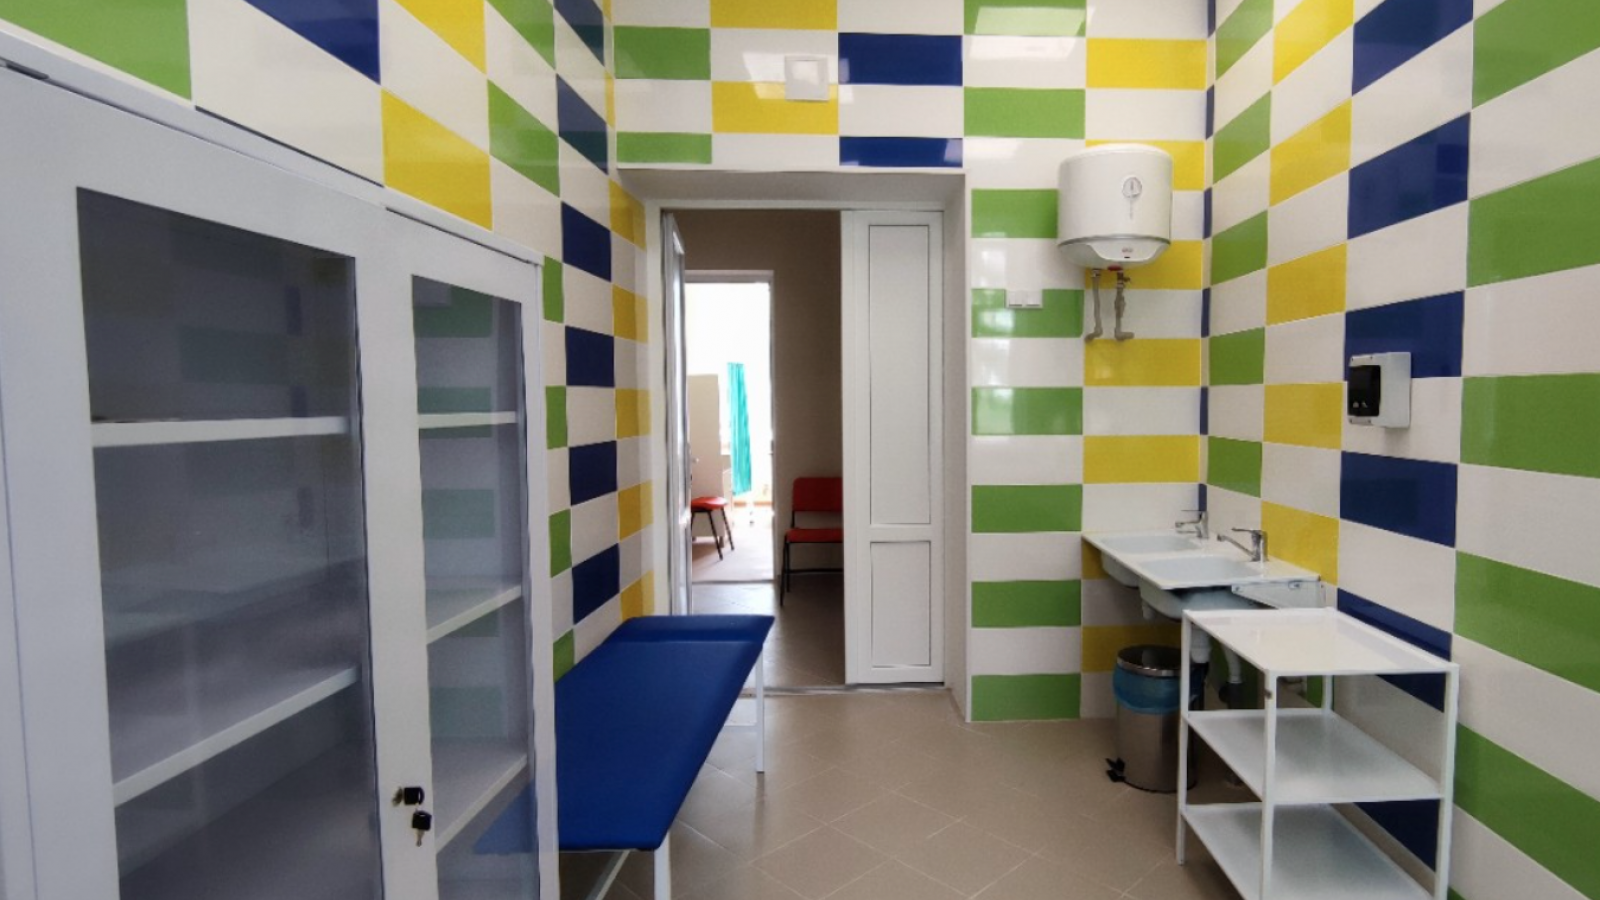 Ukraine: children&#039;s clinic renovated with EU and UNDP support opens in Luhansk oblast